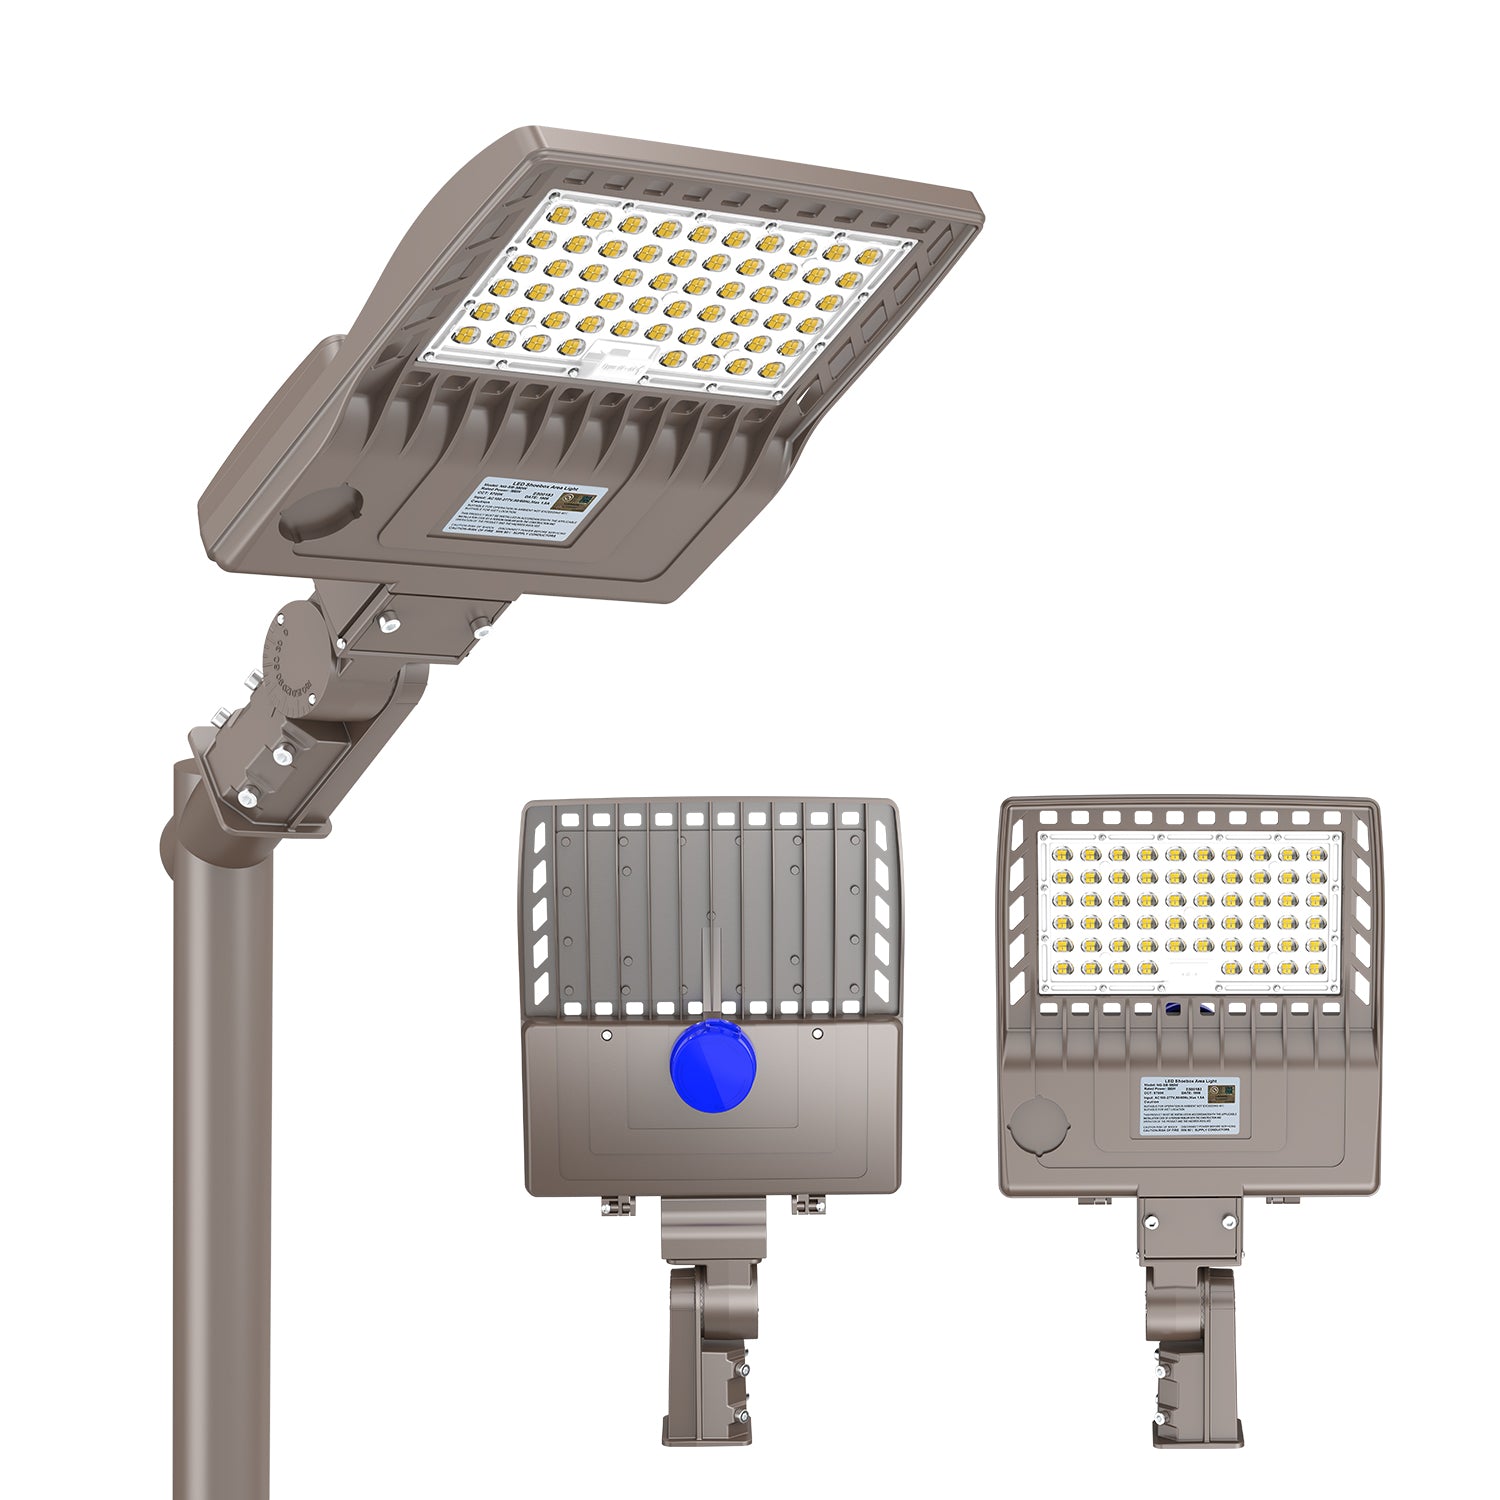 Outside Security Lighting Cost - How Much Do Security Lights Cost?